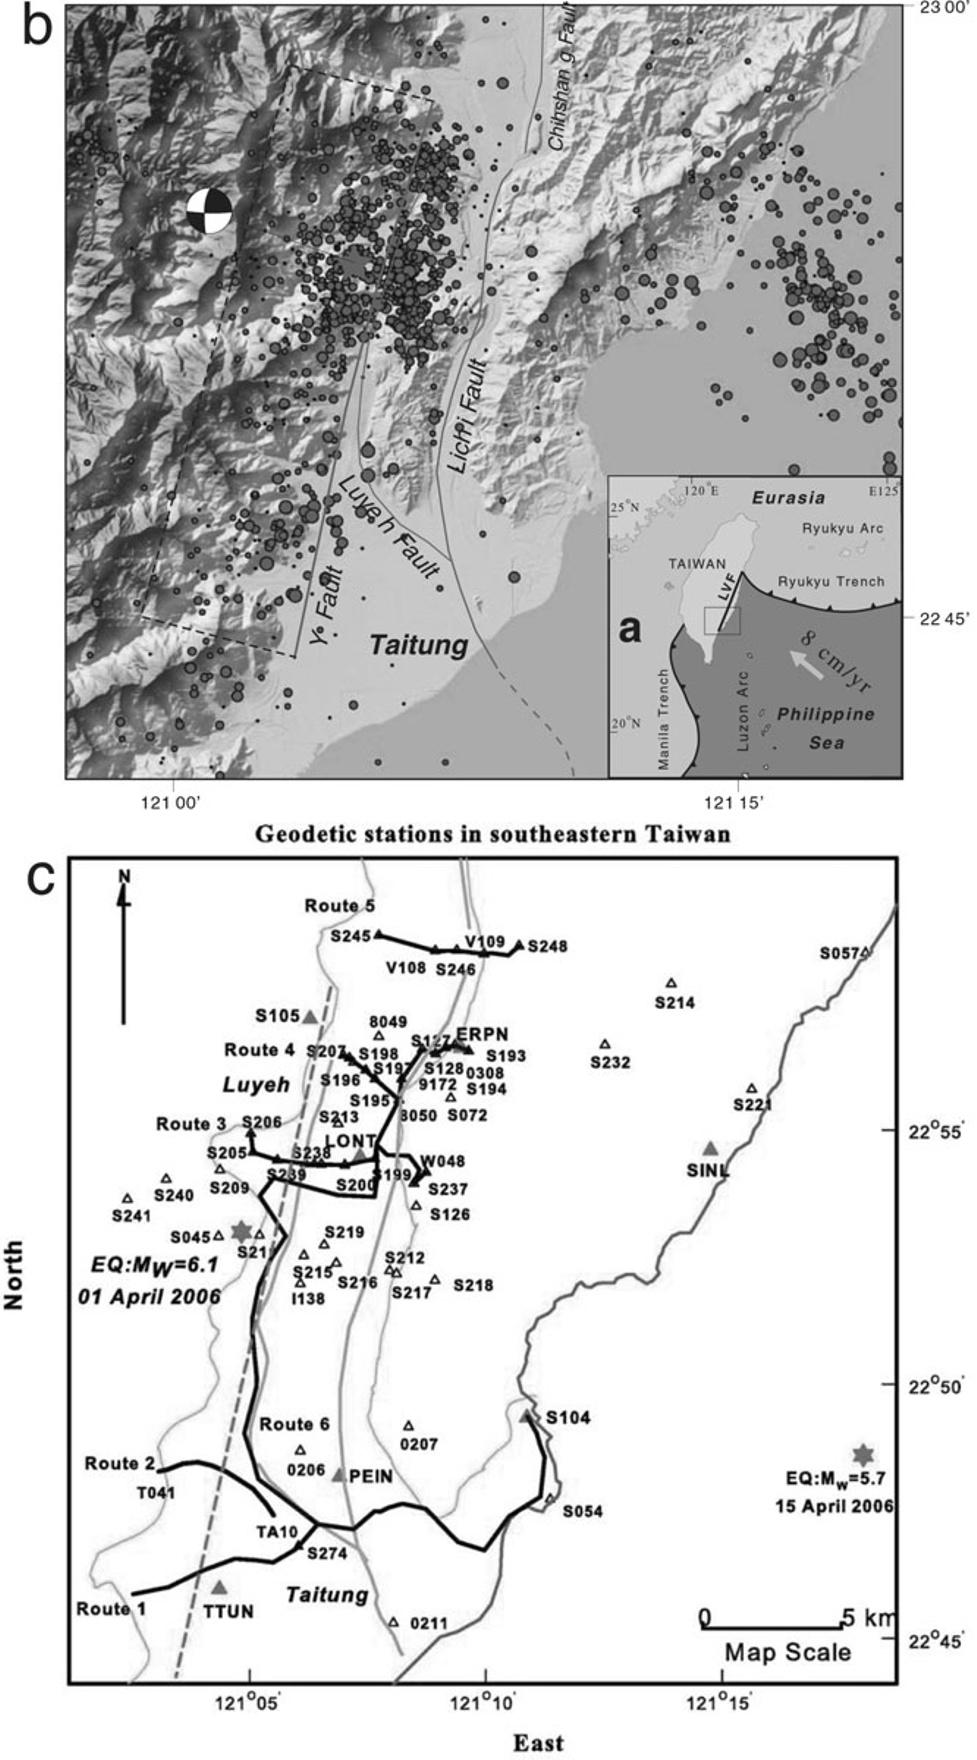 300 H.-Y. CHEN et al.: COSEISMIC DISPLACEMENT AND SLIP DISTRIBUTION FOR 2006 PEINAN EARTHQUAKE Fig. 1. (a) Tectonic framework of the Taiwan area.